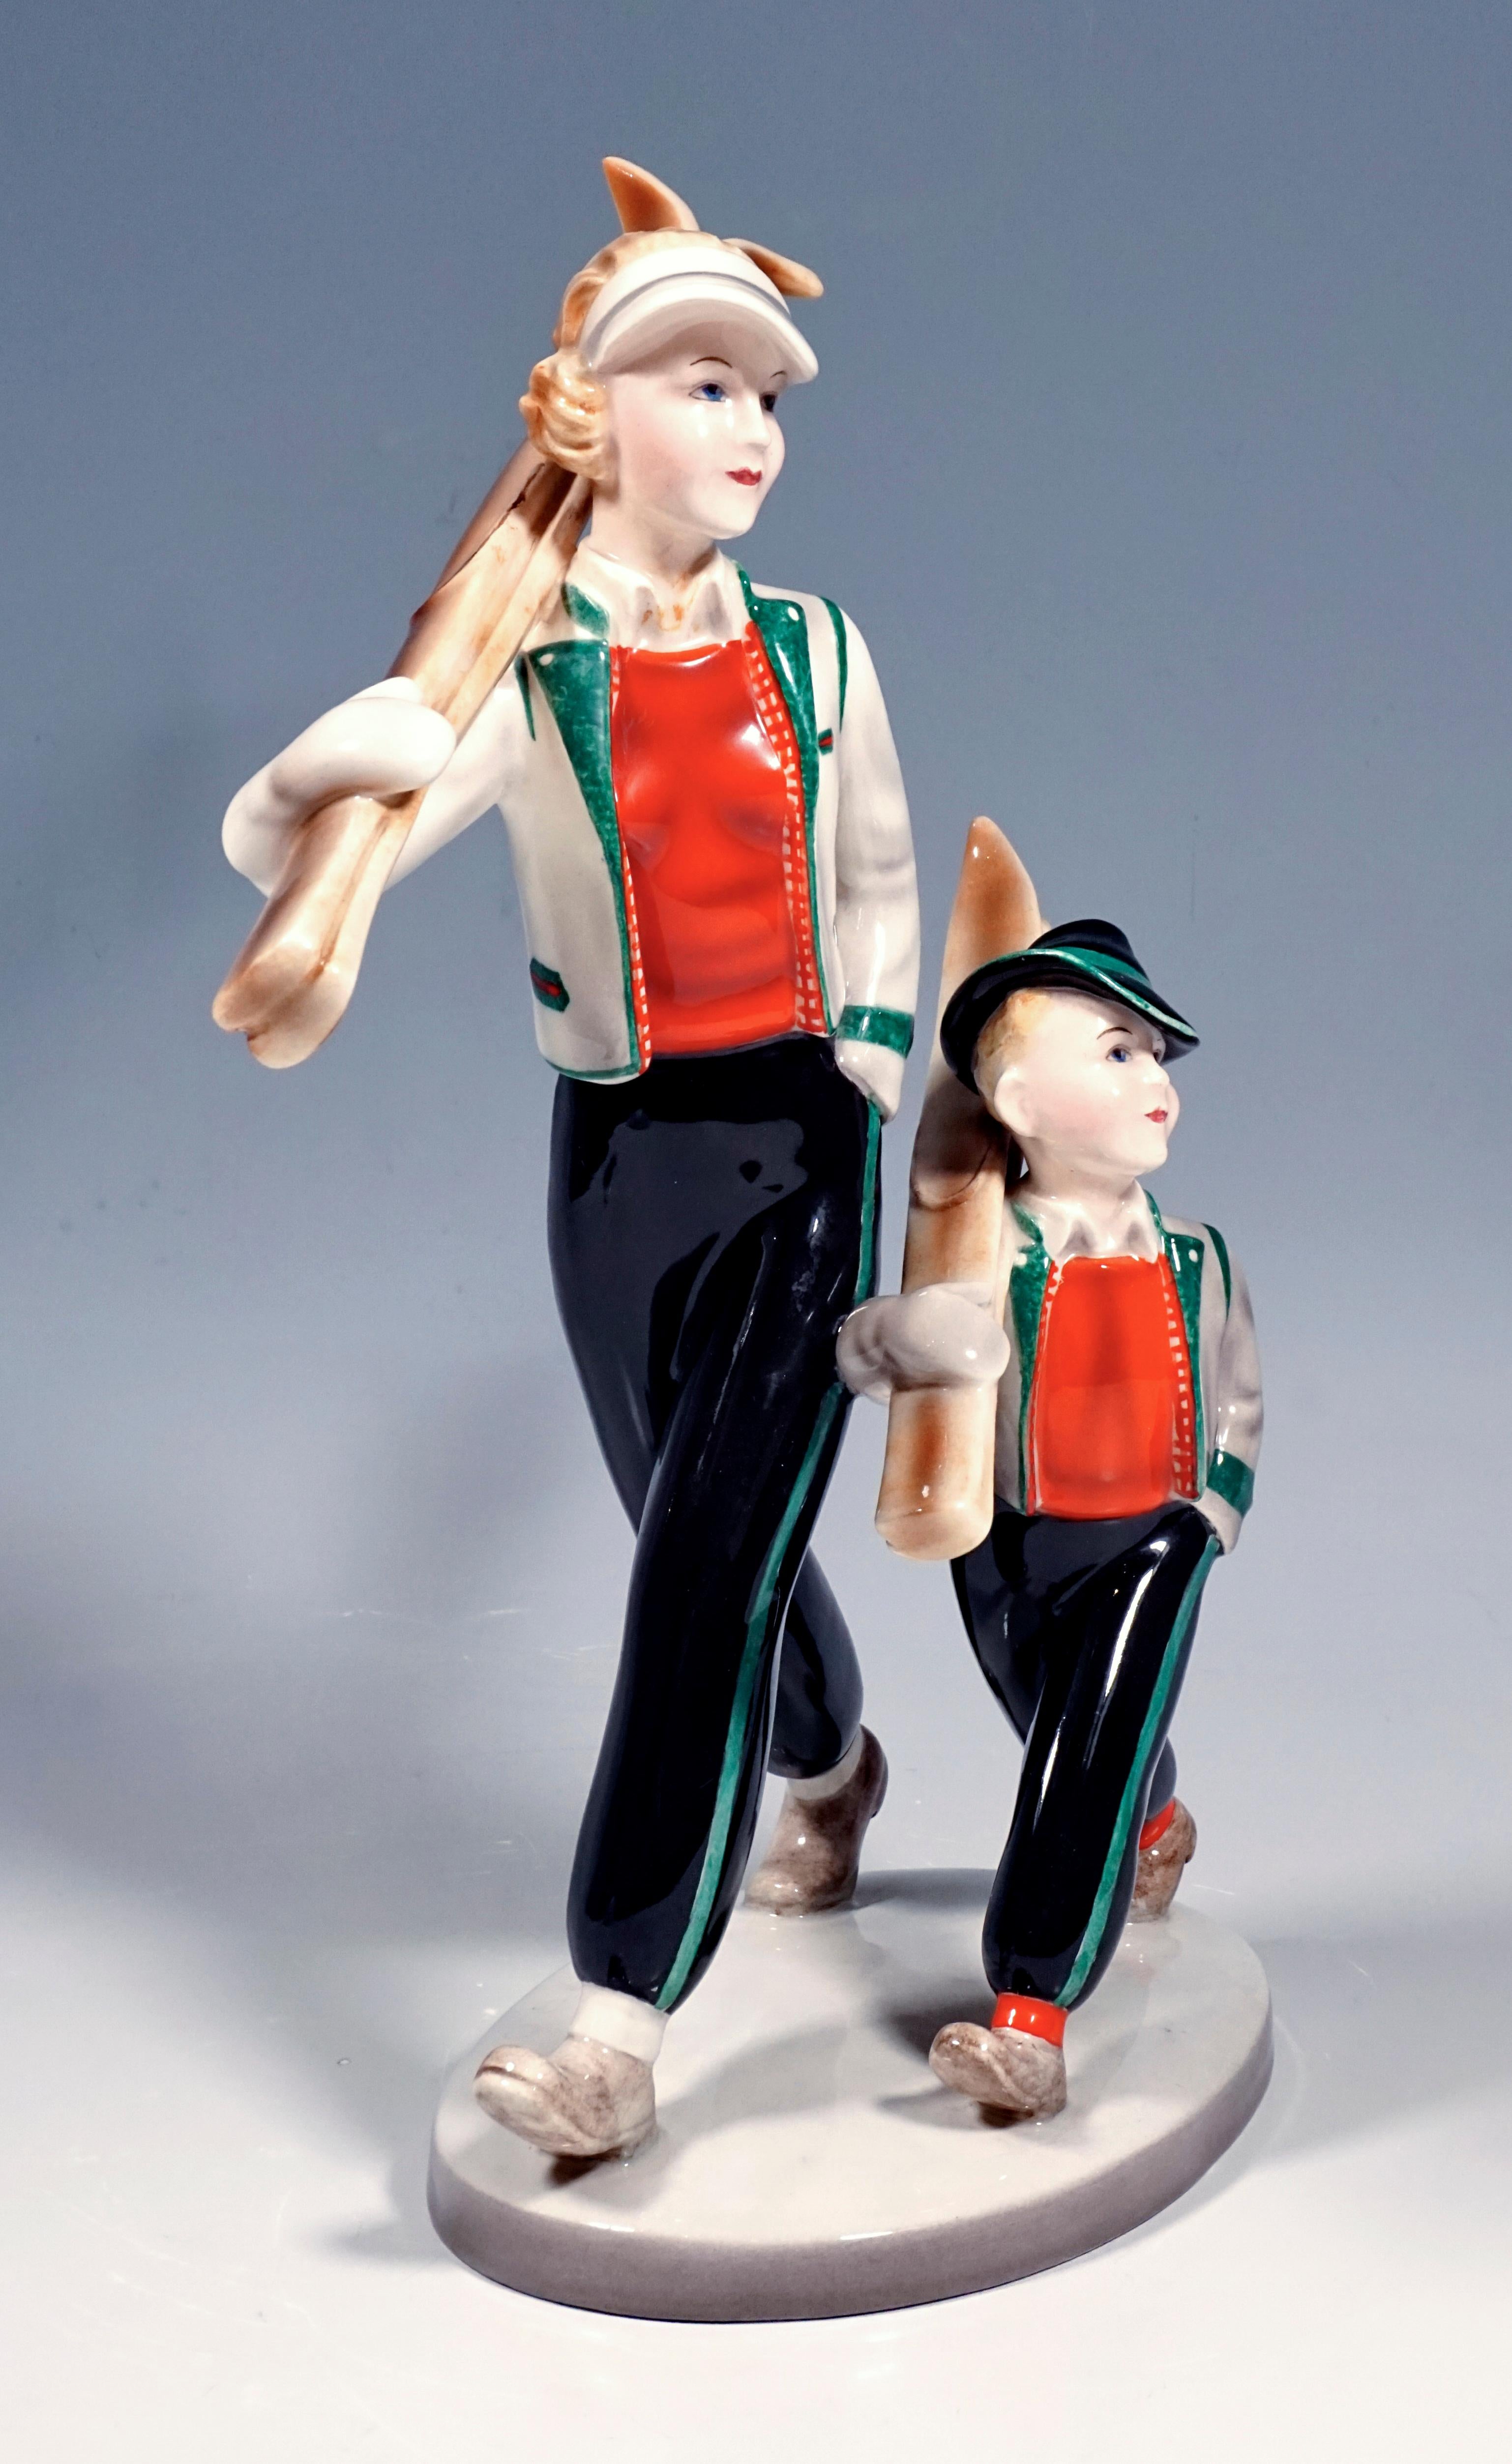 Rare Goldscheider Vienna Figurine Group of the 1930s.
Two figures walking side by side, mother and child with shouldered skis. Both ware winter clothing that was common in Tyrol in the 1930s: black trousers with cuffs and jackets in traditional